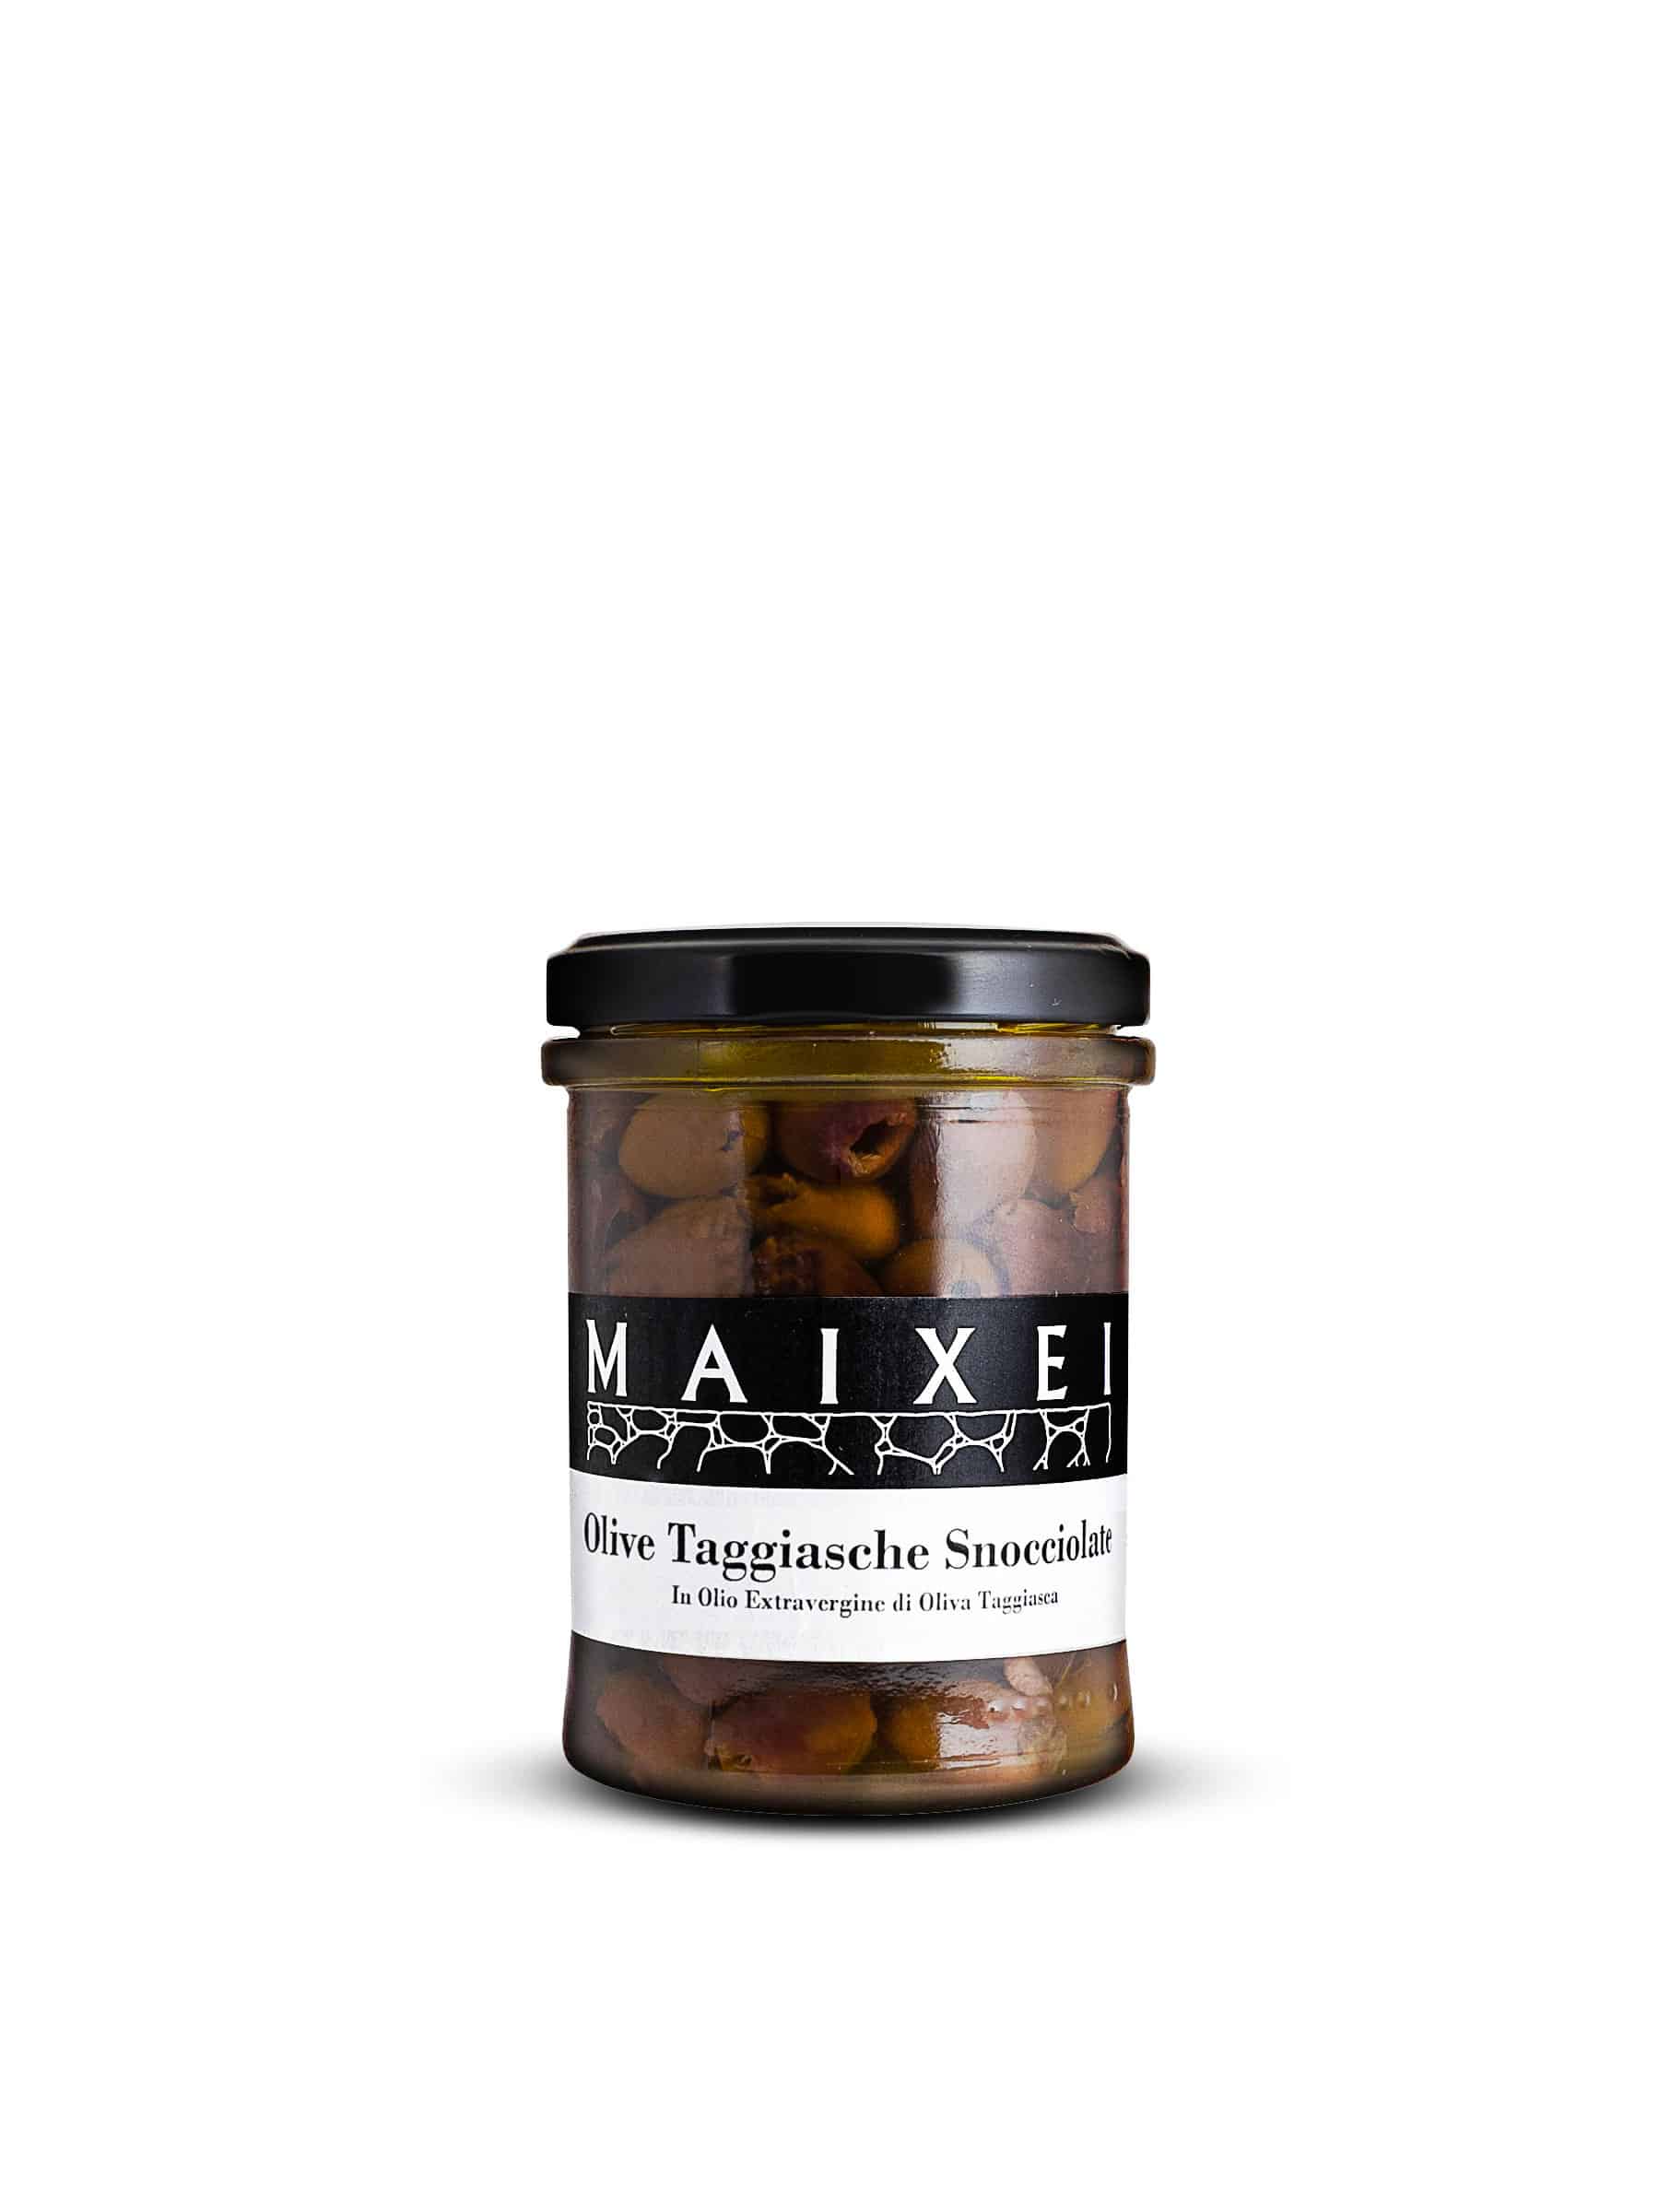 OLIVE TAGGIASCHE SNOCCIOLATE IN OLIO EVO (OLIVES TAGGIASCA DÉNOYAUTÉES À L'HUILE D’OLIVE EXTRA VIERGE) 180gr